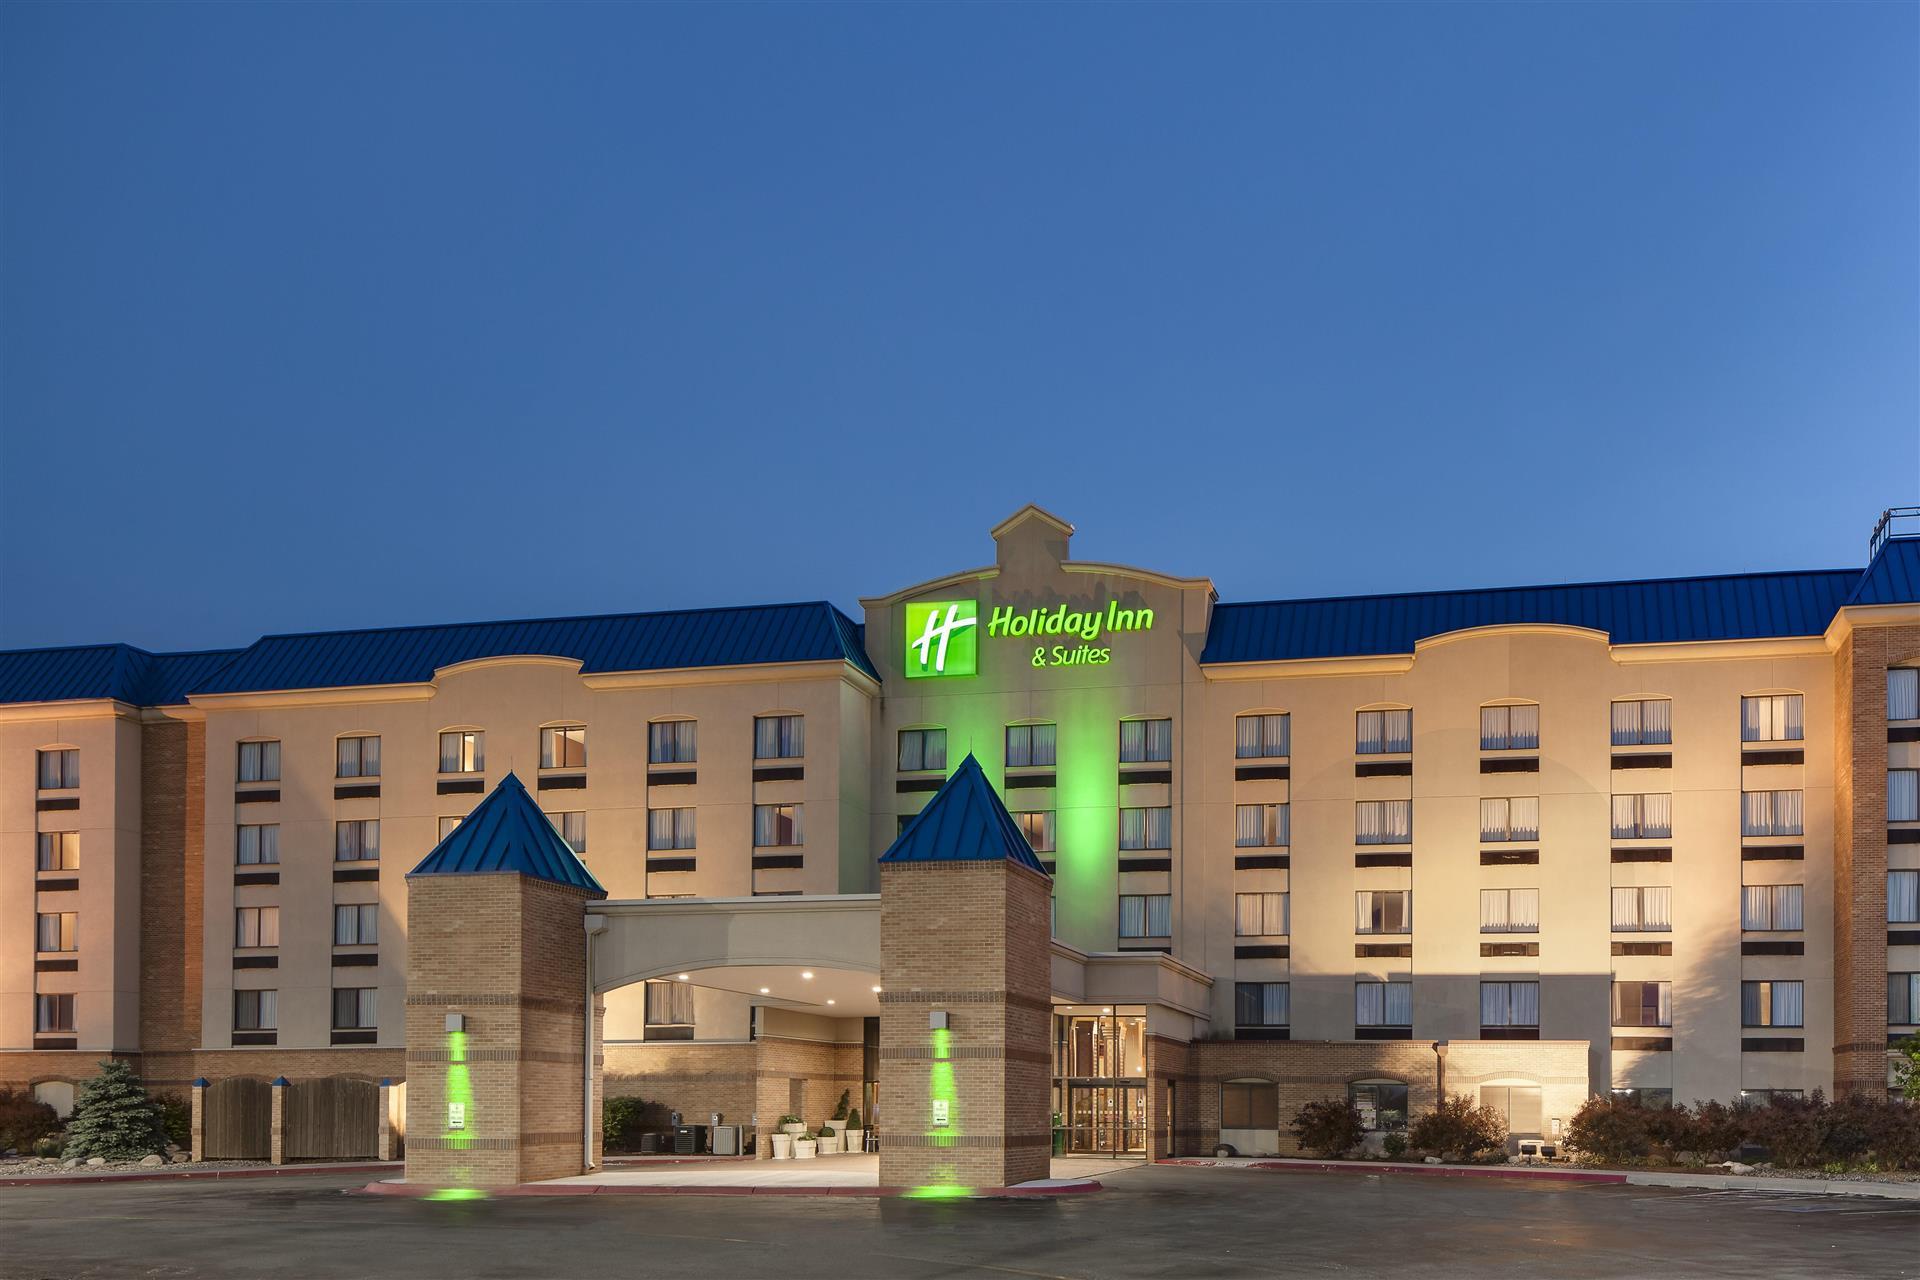 Holiday Inn & Suites Council Bluffs in Council Bluffs, IA